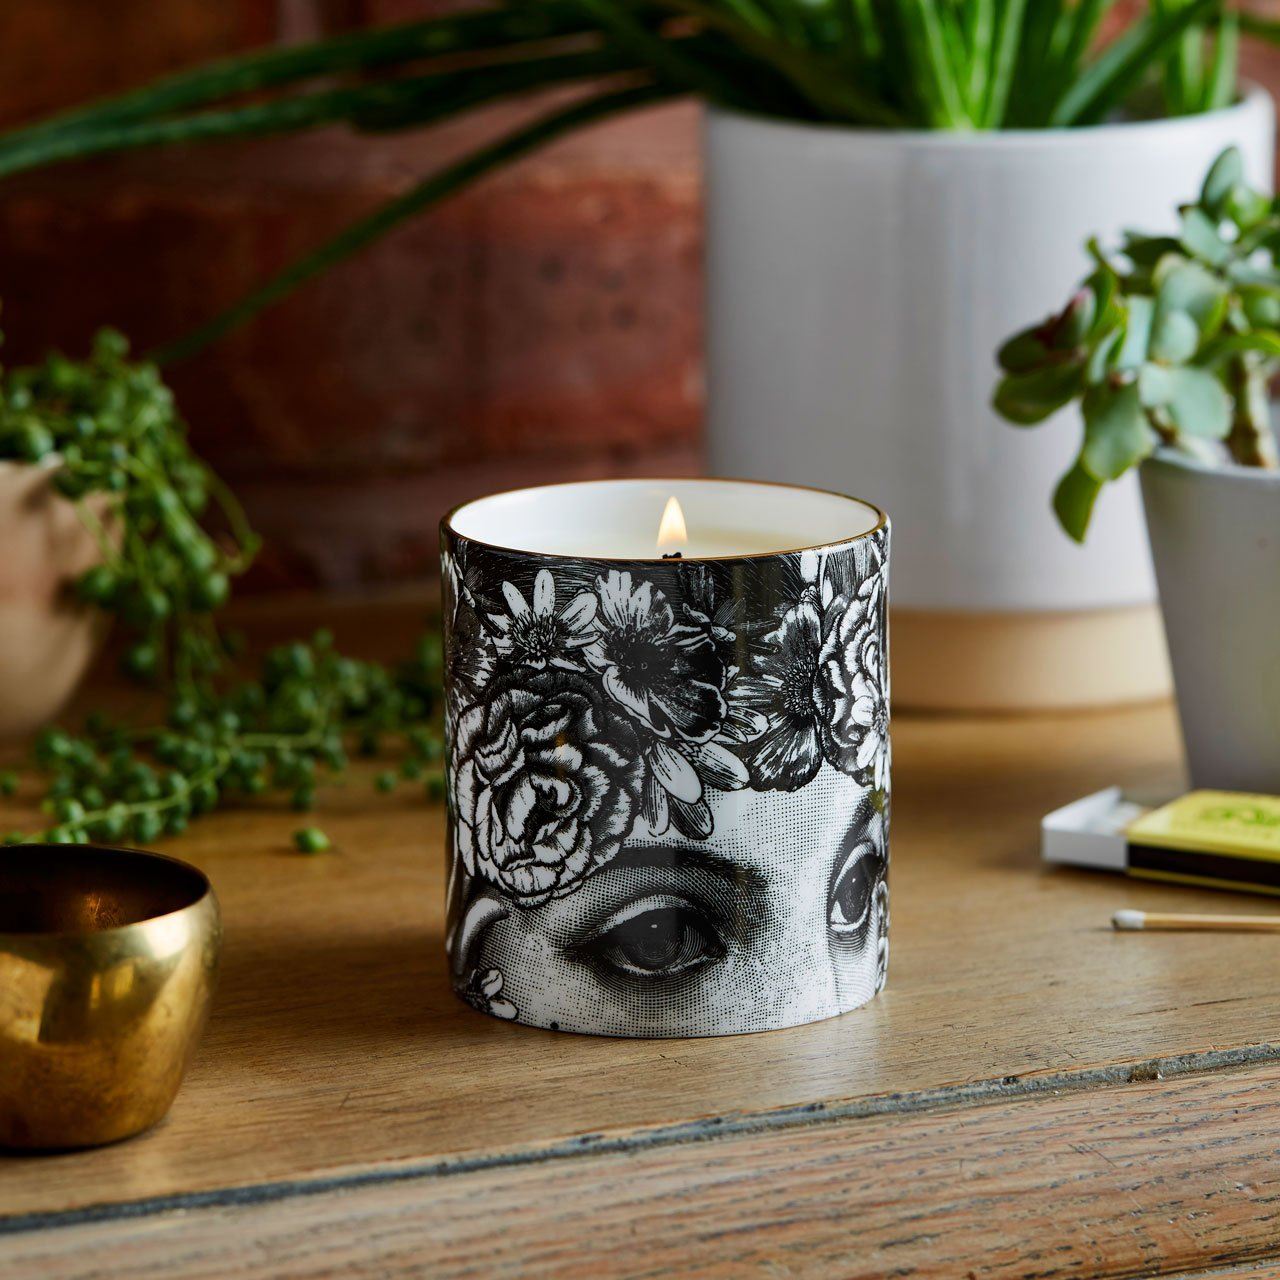 The Flower Lady Ceramic Candle - Chase and Wonder - Proudly Made in Britain